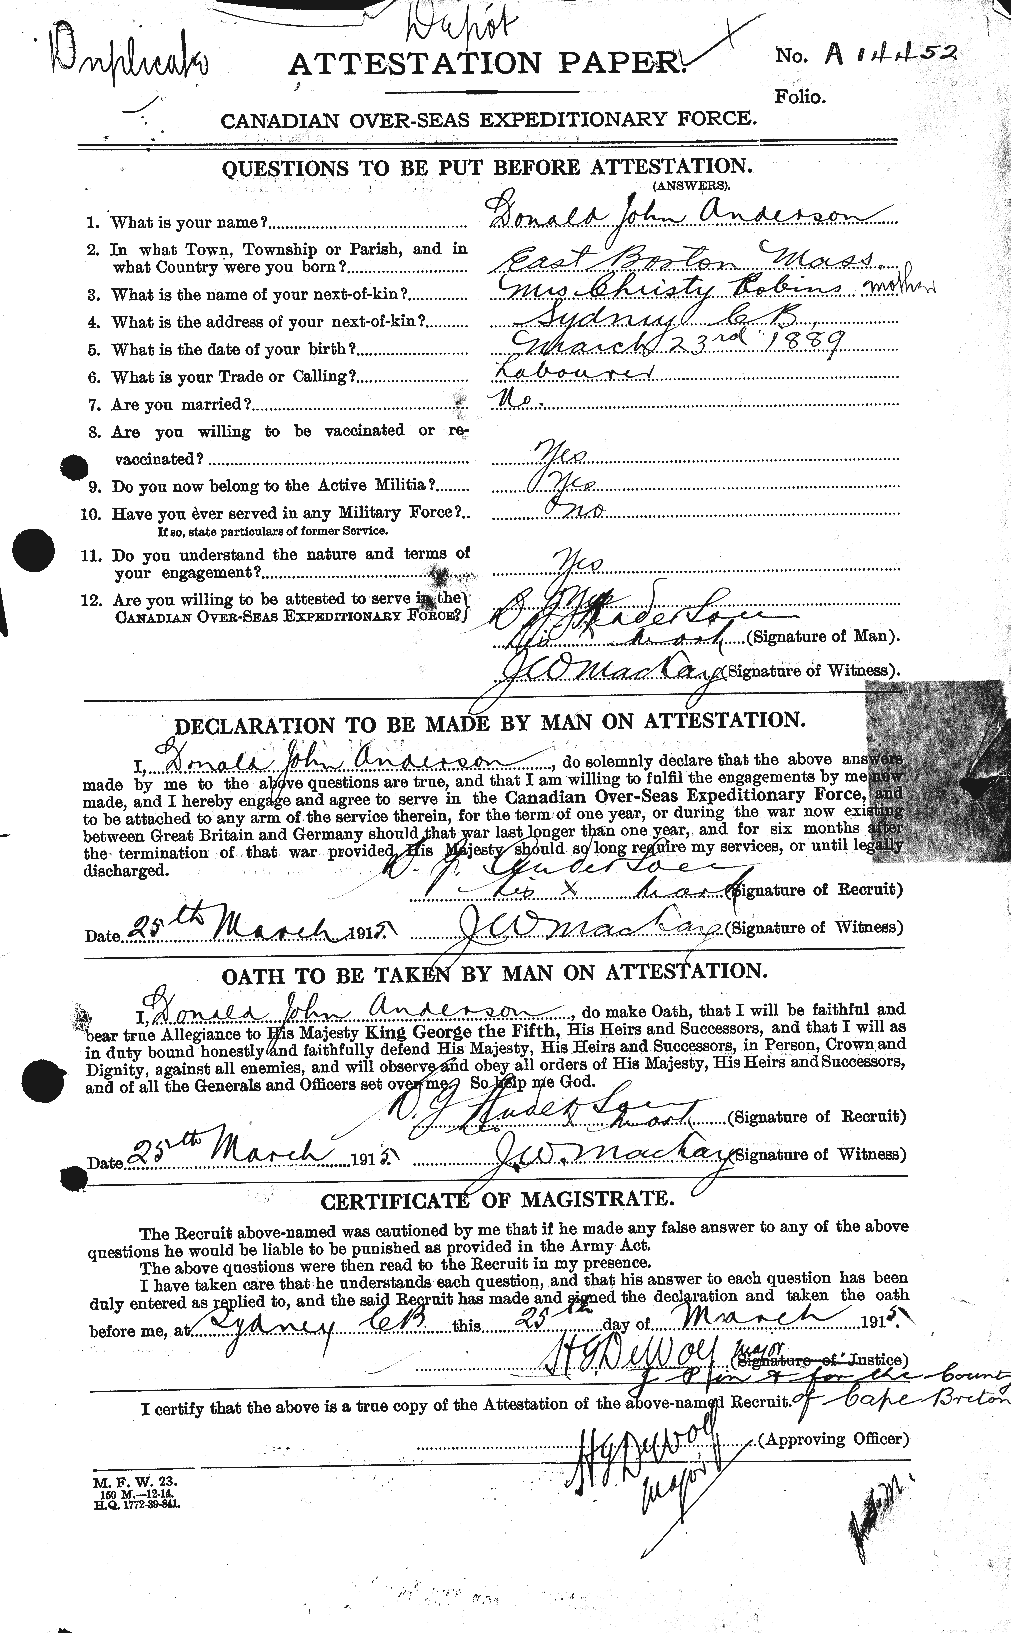 Personnel Records of the First World War - CEF 209985a